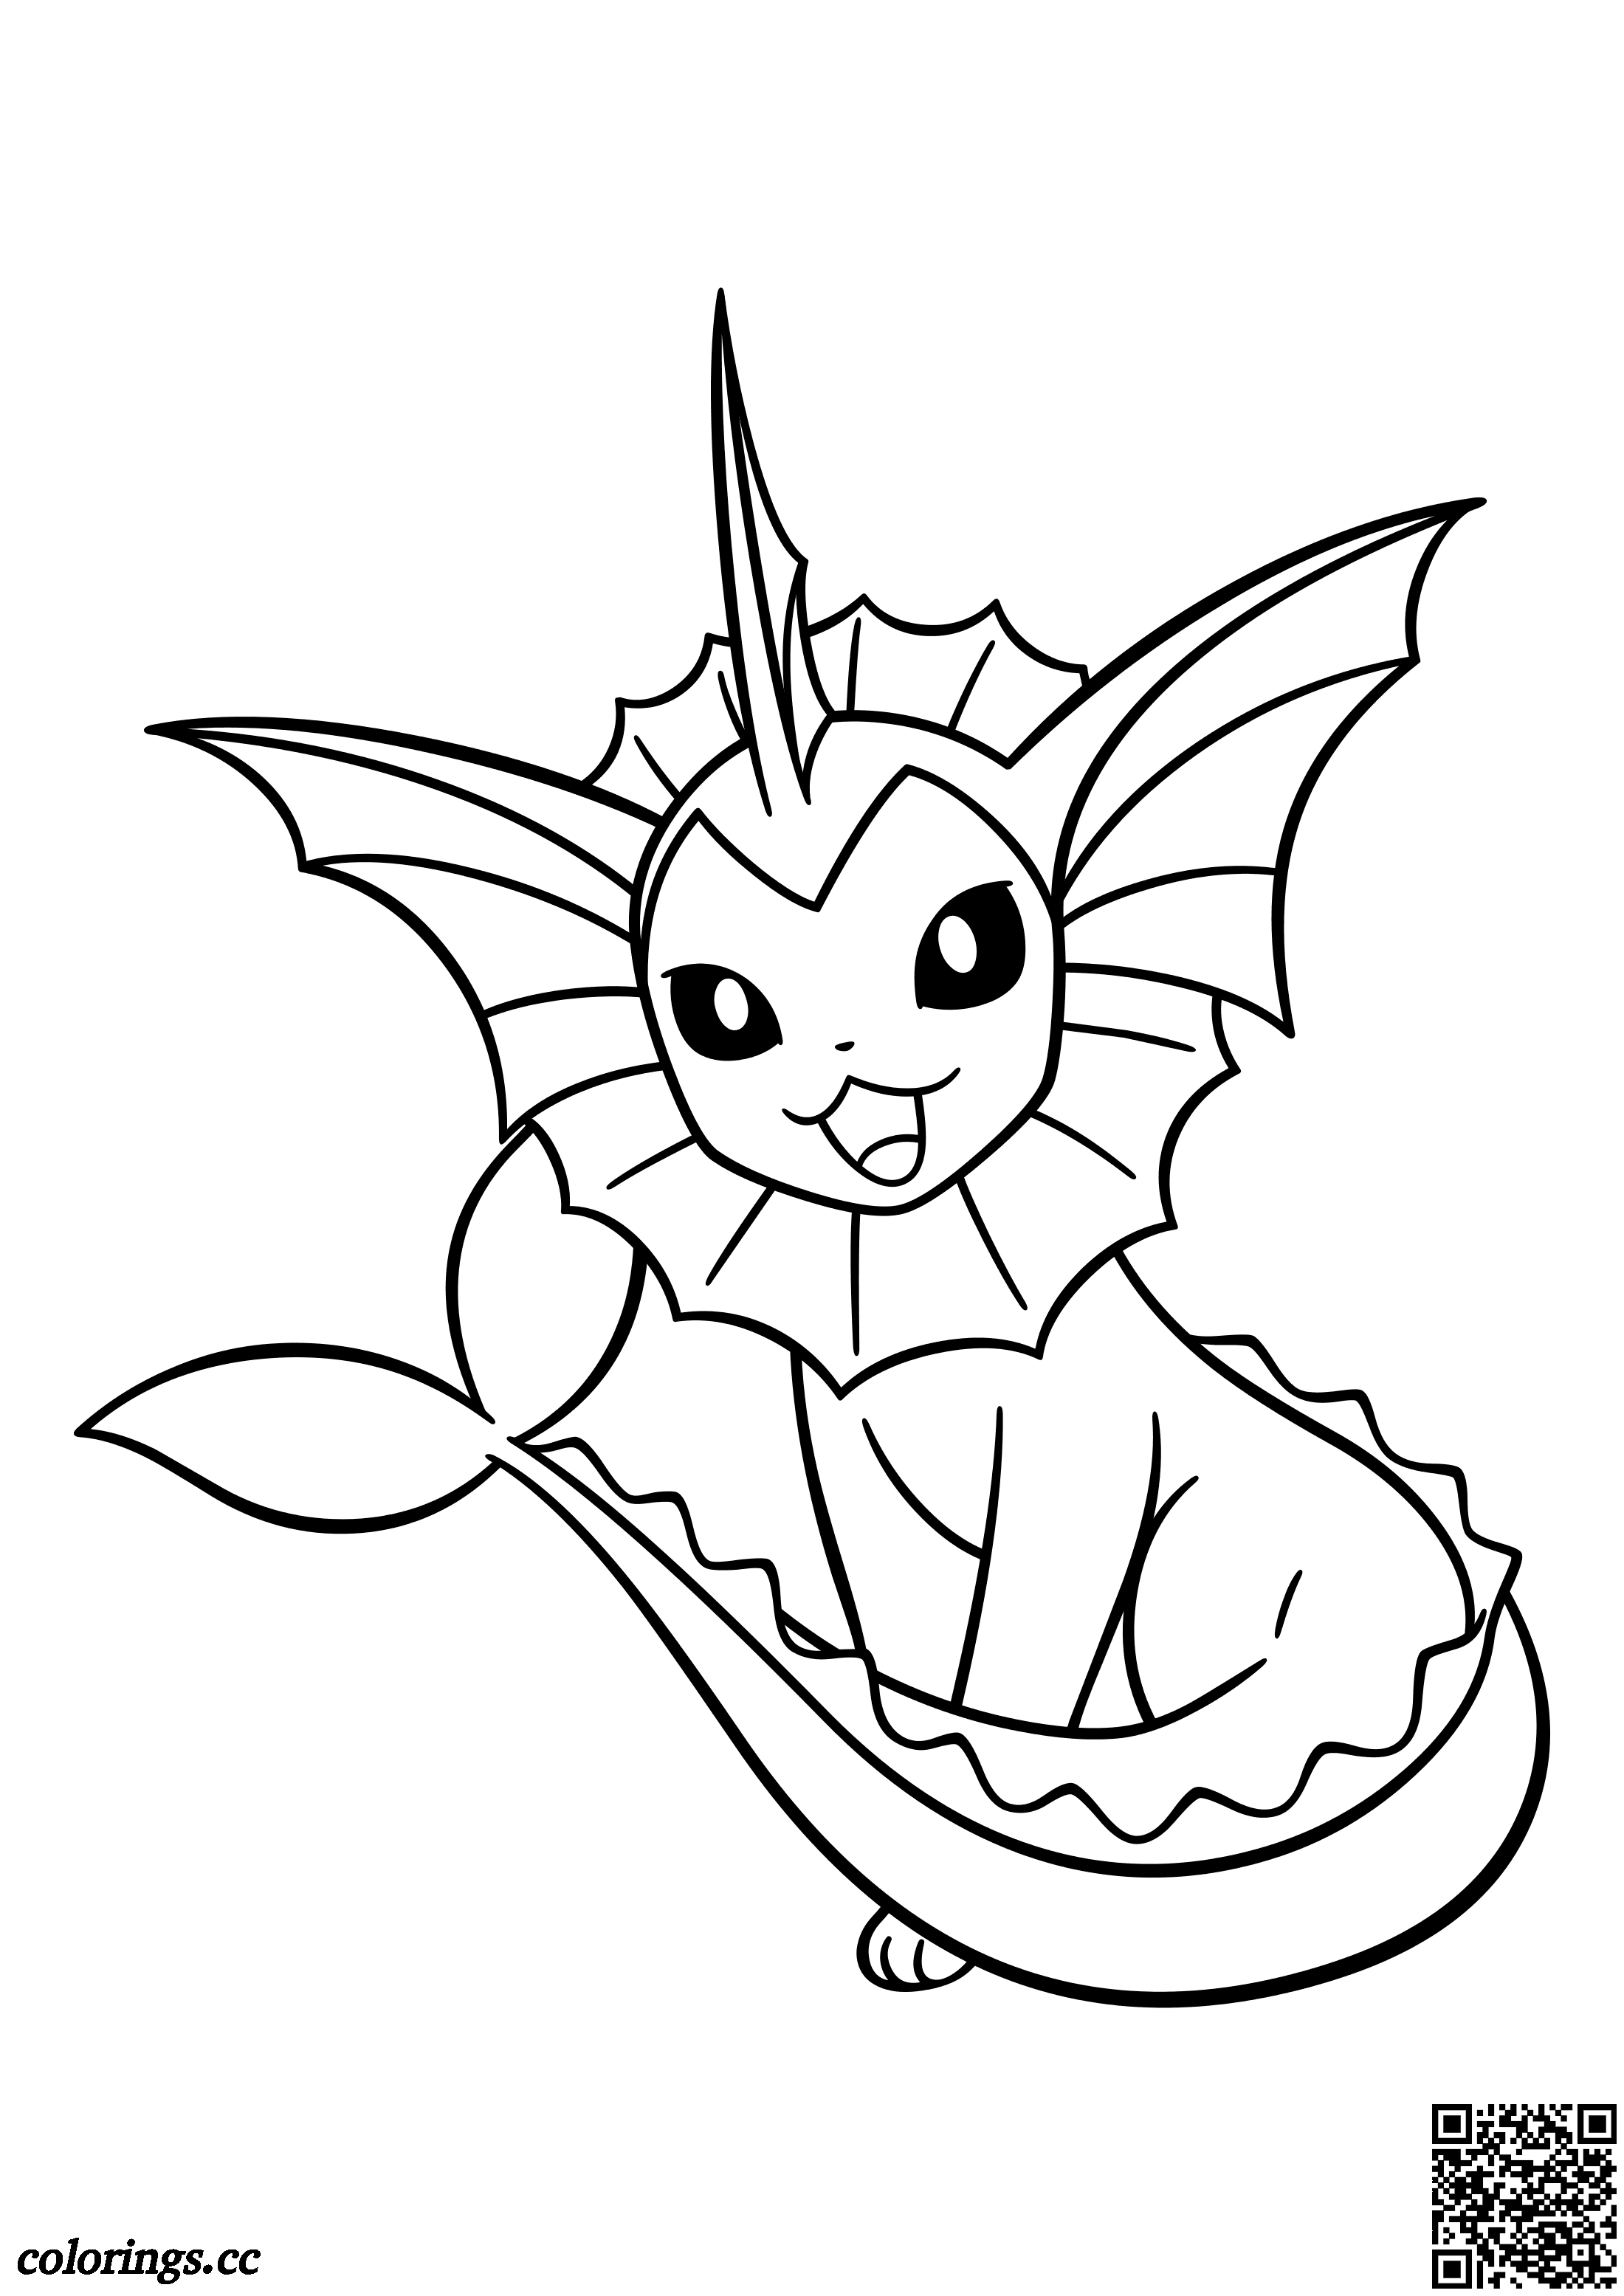 Pokemon Coloring Pages Vaporeon